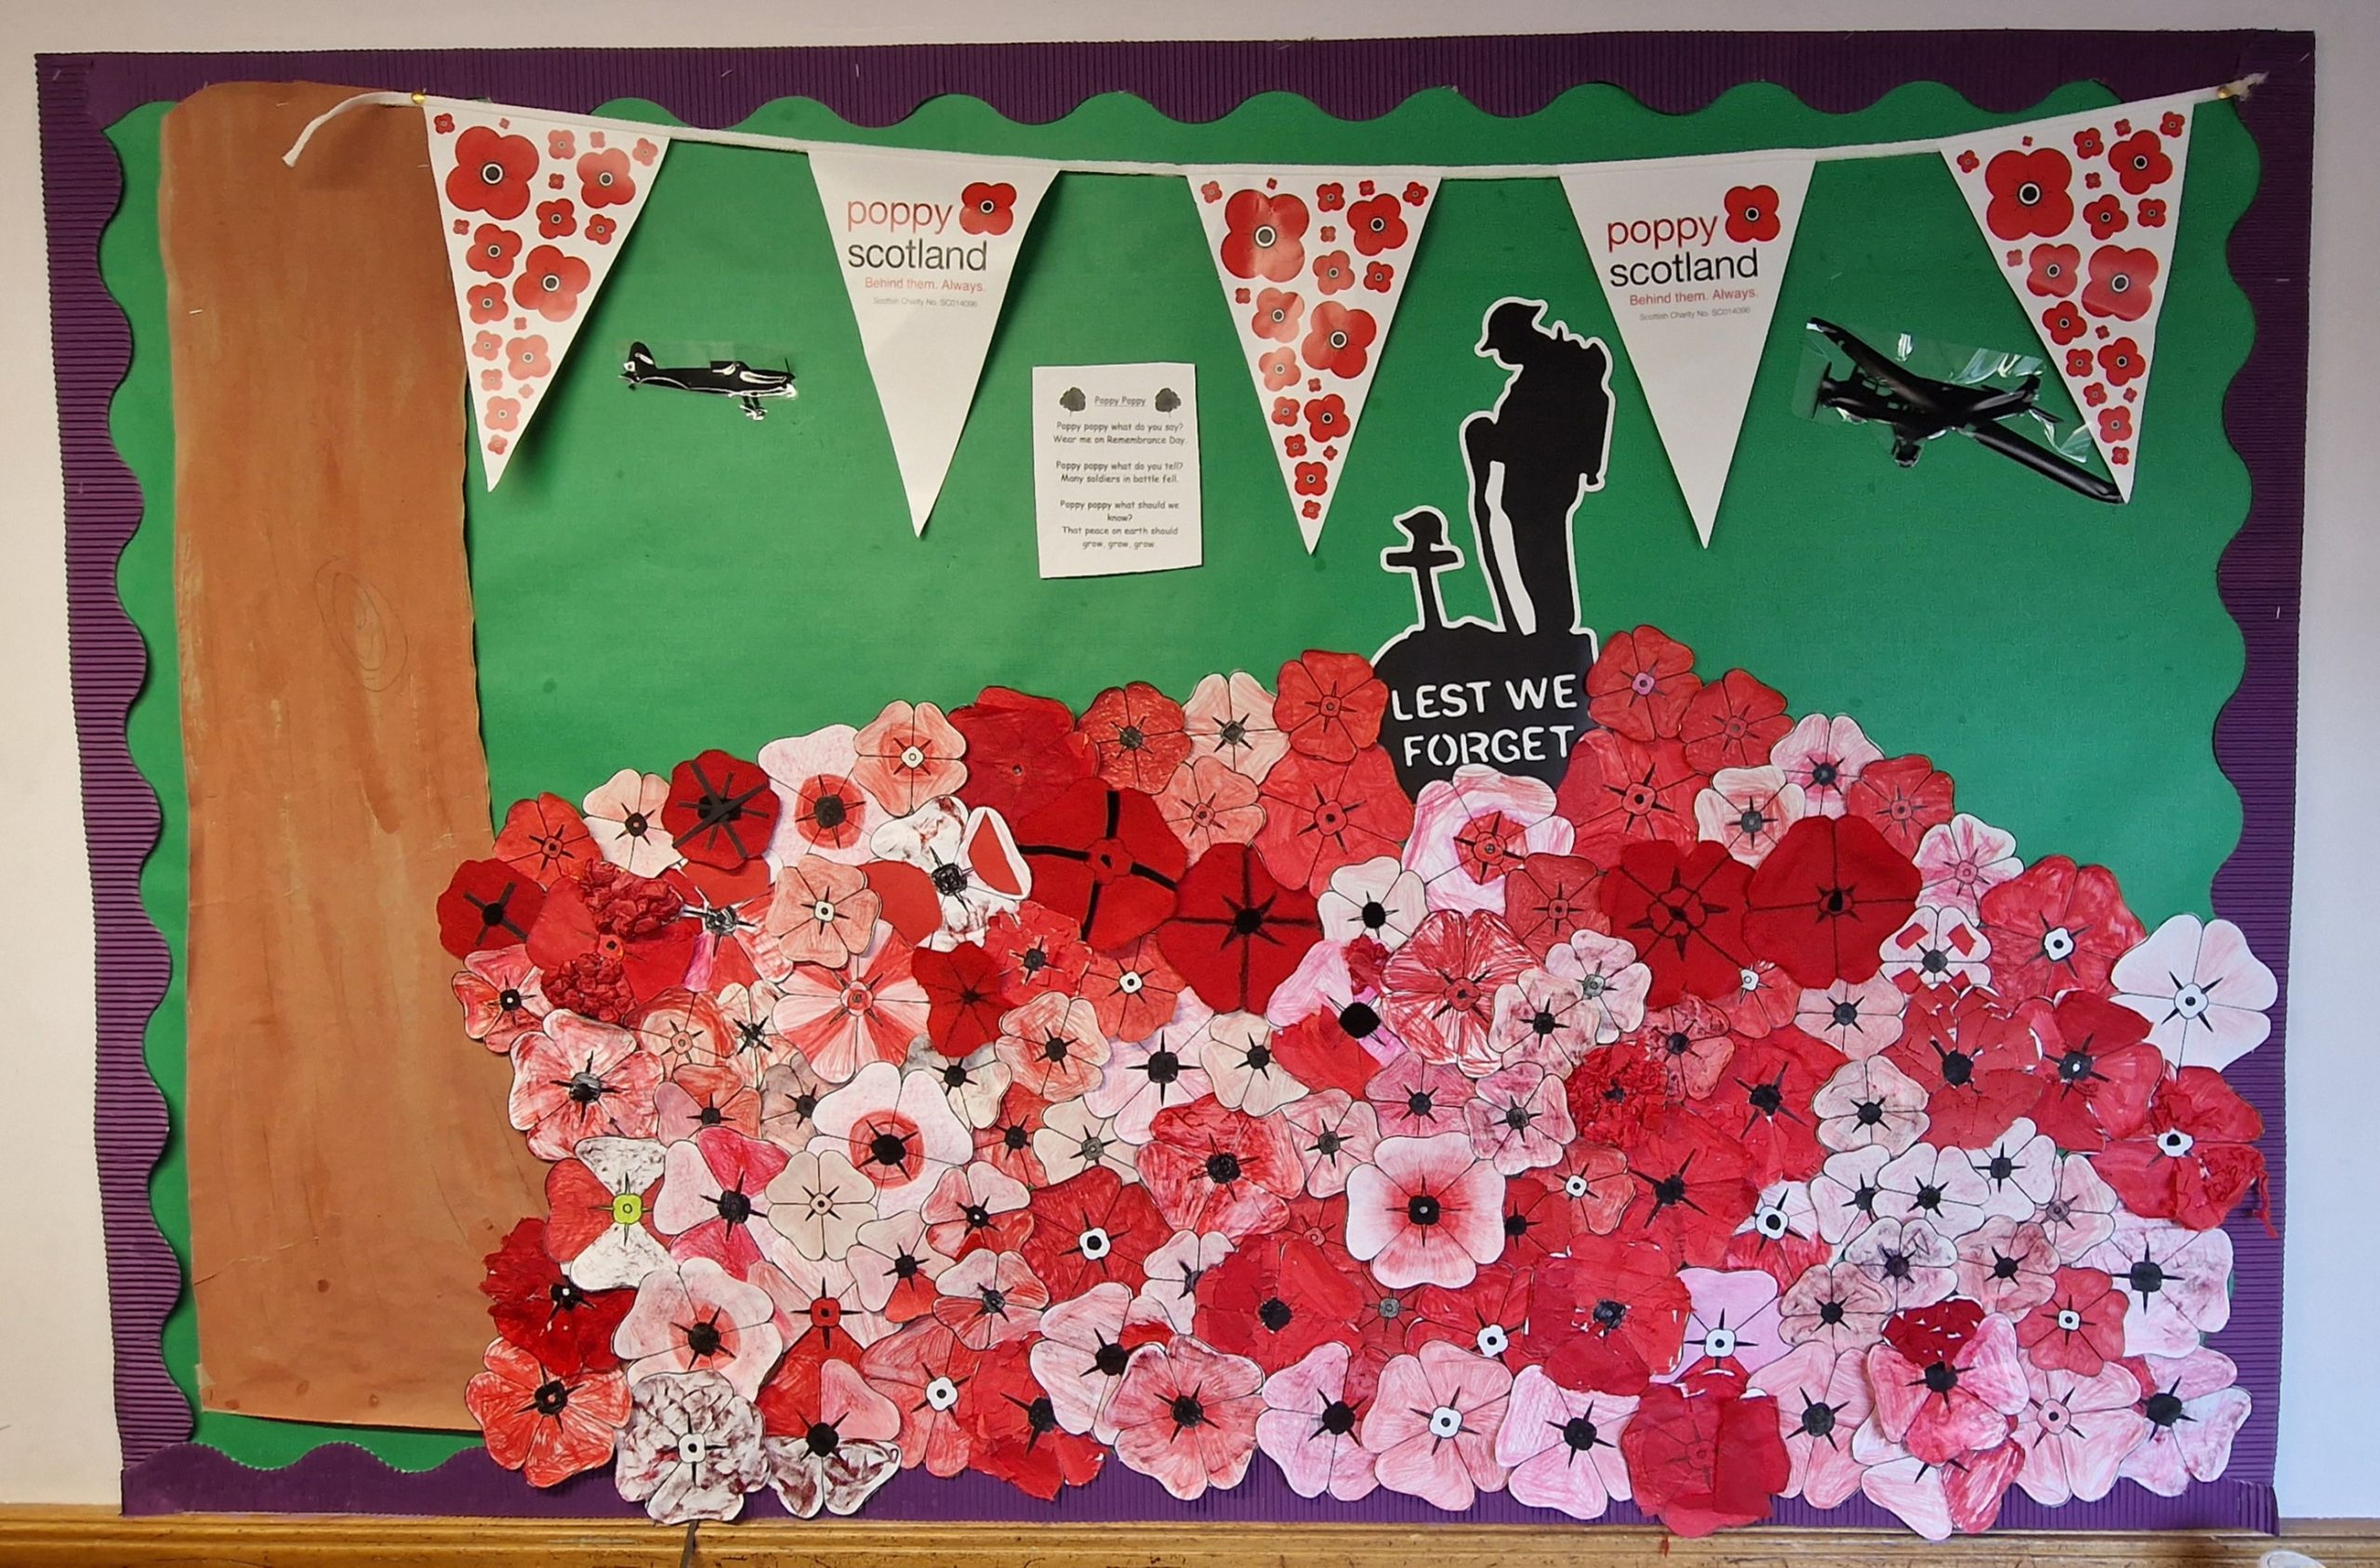 A wall display shows a colourful mountain of hand drawn poppies with a "lest we forget" memorial graphic